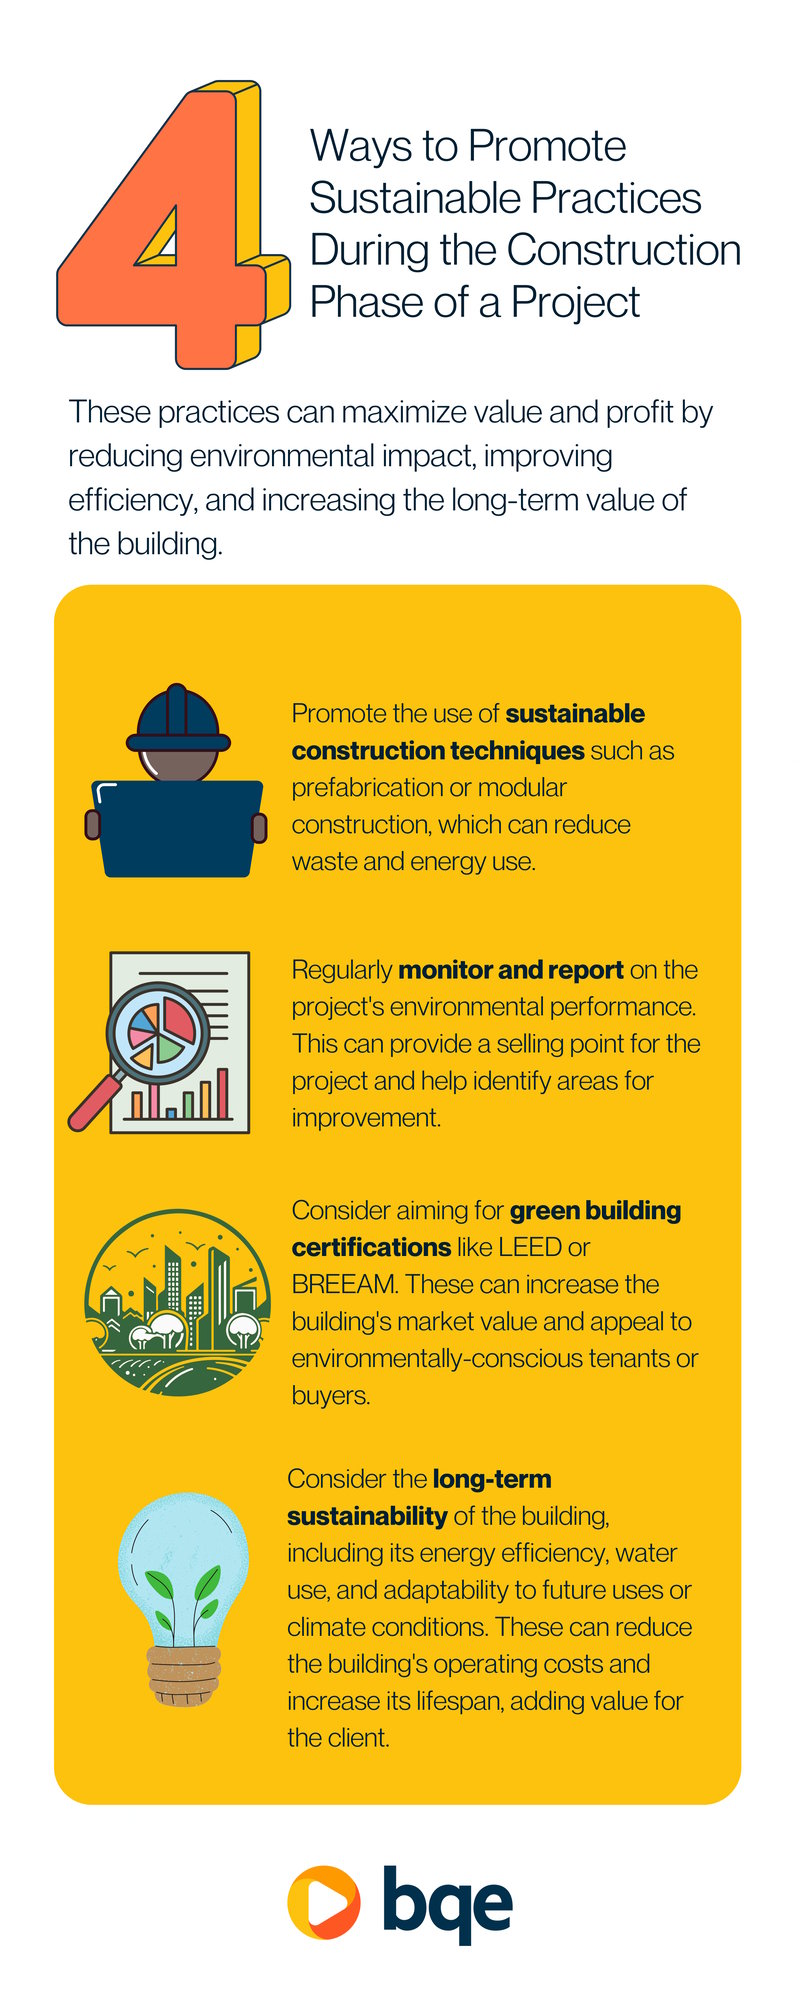 Ways to Promote Sustainable Practices During the Construction Phase of a Project